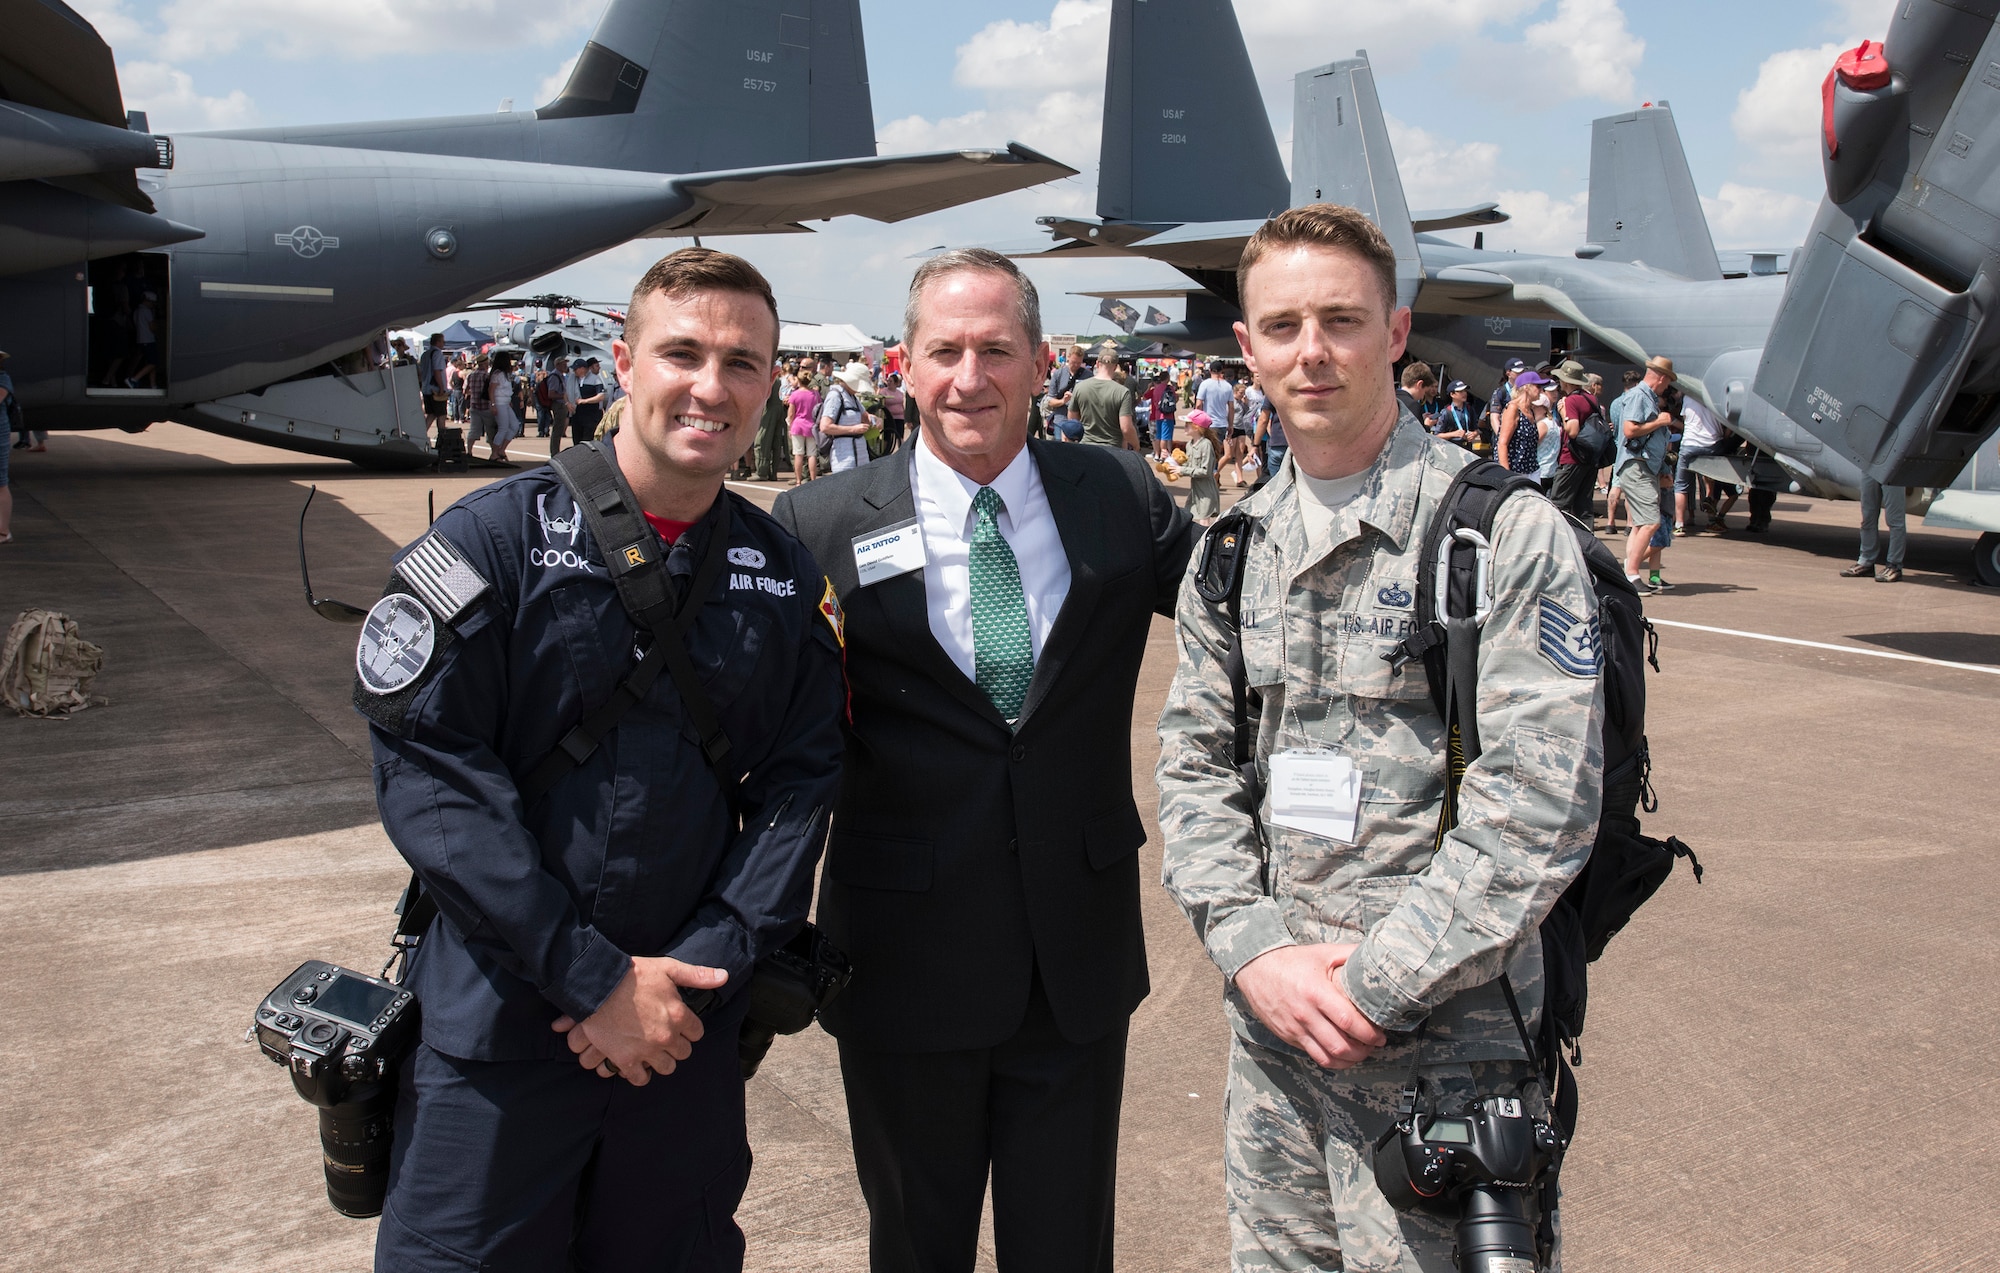 Airman 1st Class Alexander Cook, F-35 Heritage Flight Team public affairs, and Tech. Sgt. Brian Kimball, 501st Combat Support Wing photojournalist, pose for a photo with Chief of Staff of the Air Force, Gen. David Goldfein July 14, 2018 at Royal Air Force Fairford, England. As a member of F-35 HFT, Cook documents air shows around the world showcasing Air Force heritage.